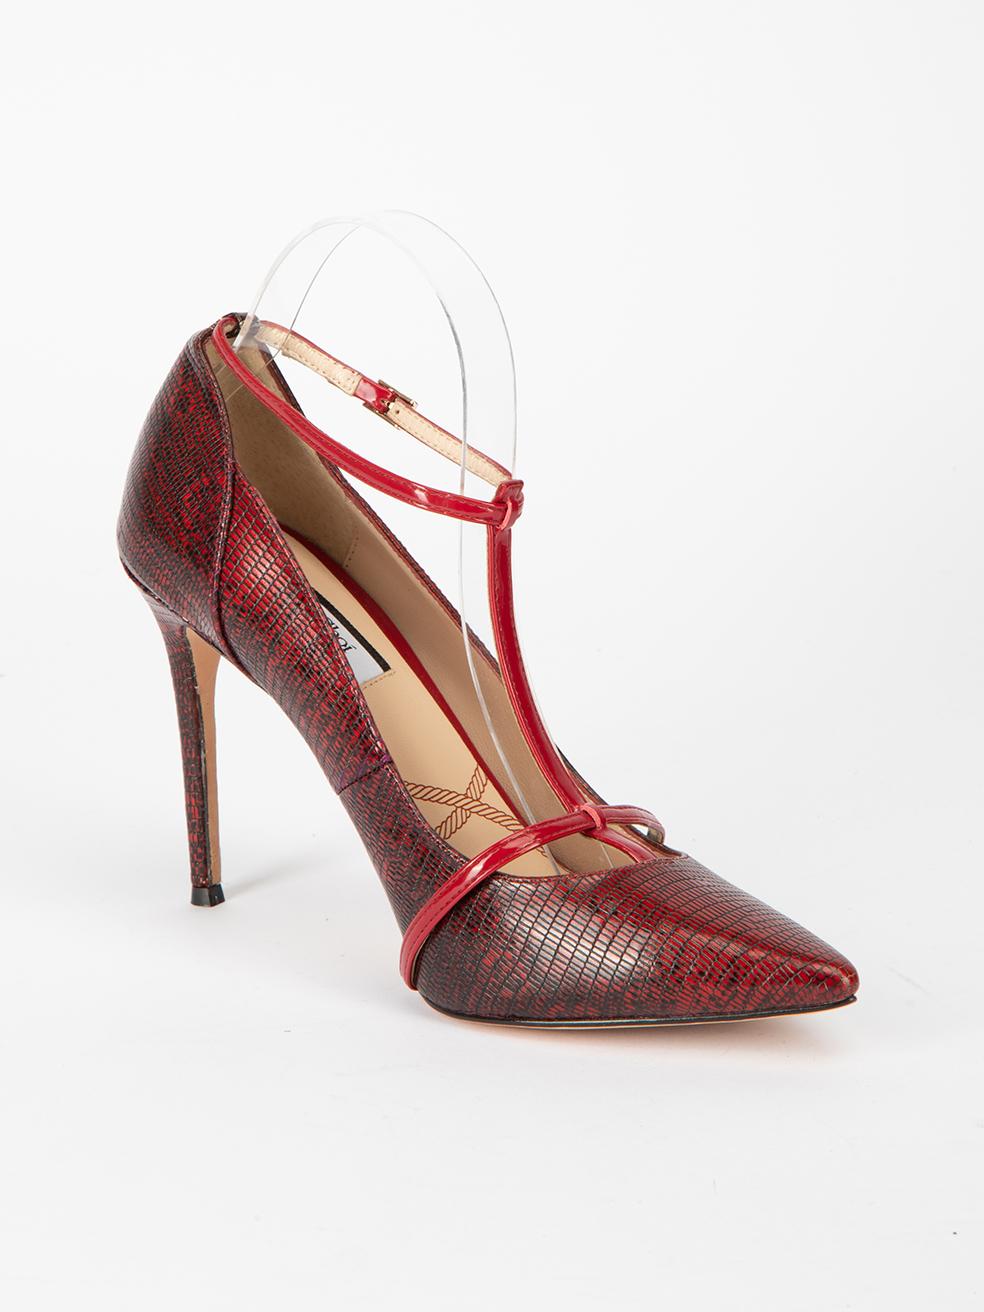 CONDITION is Very good. Hardly any visible wear to shoes is evident on this used Lucy Choi designer resale item. This item comes with original shoe box.
 
 Details
  Burgundy
 Lizard leather
 High heels
 Pointed toe
 T-strap detail
 Ankle strap